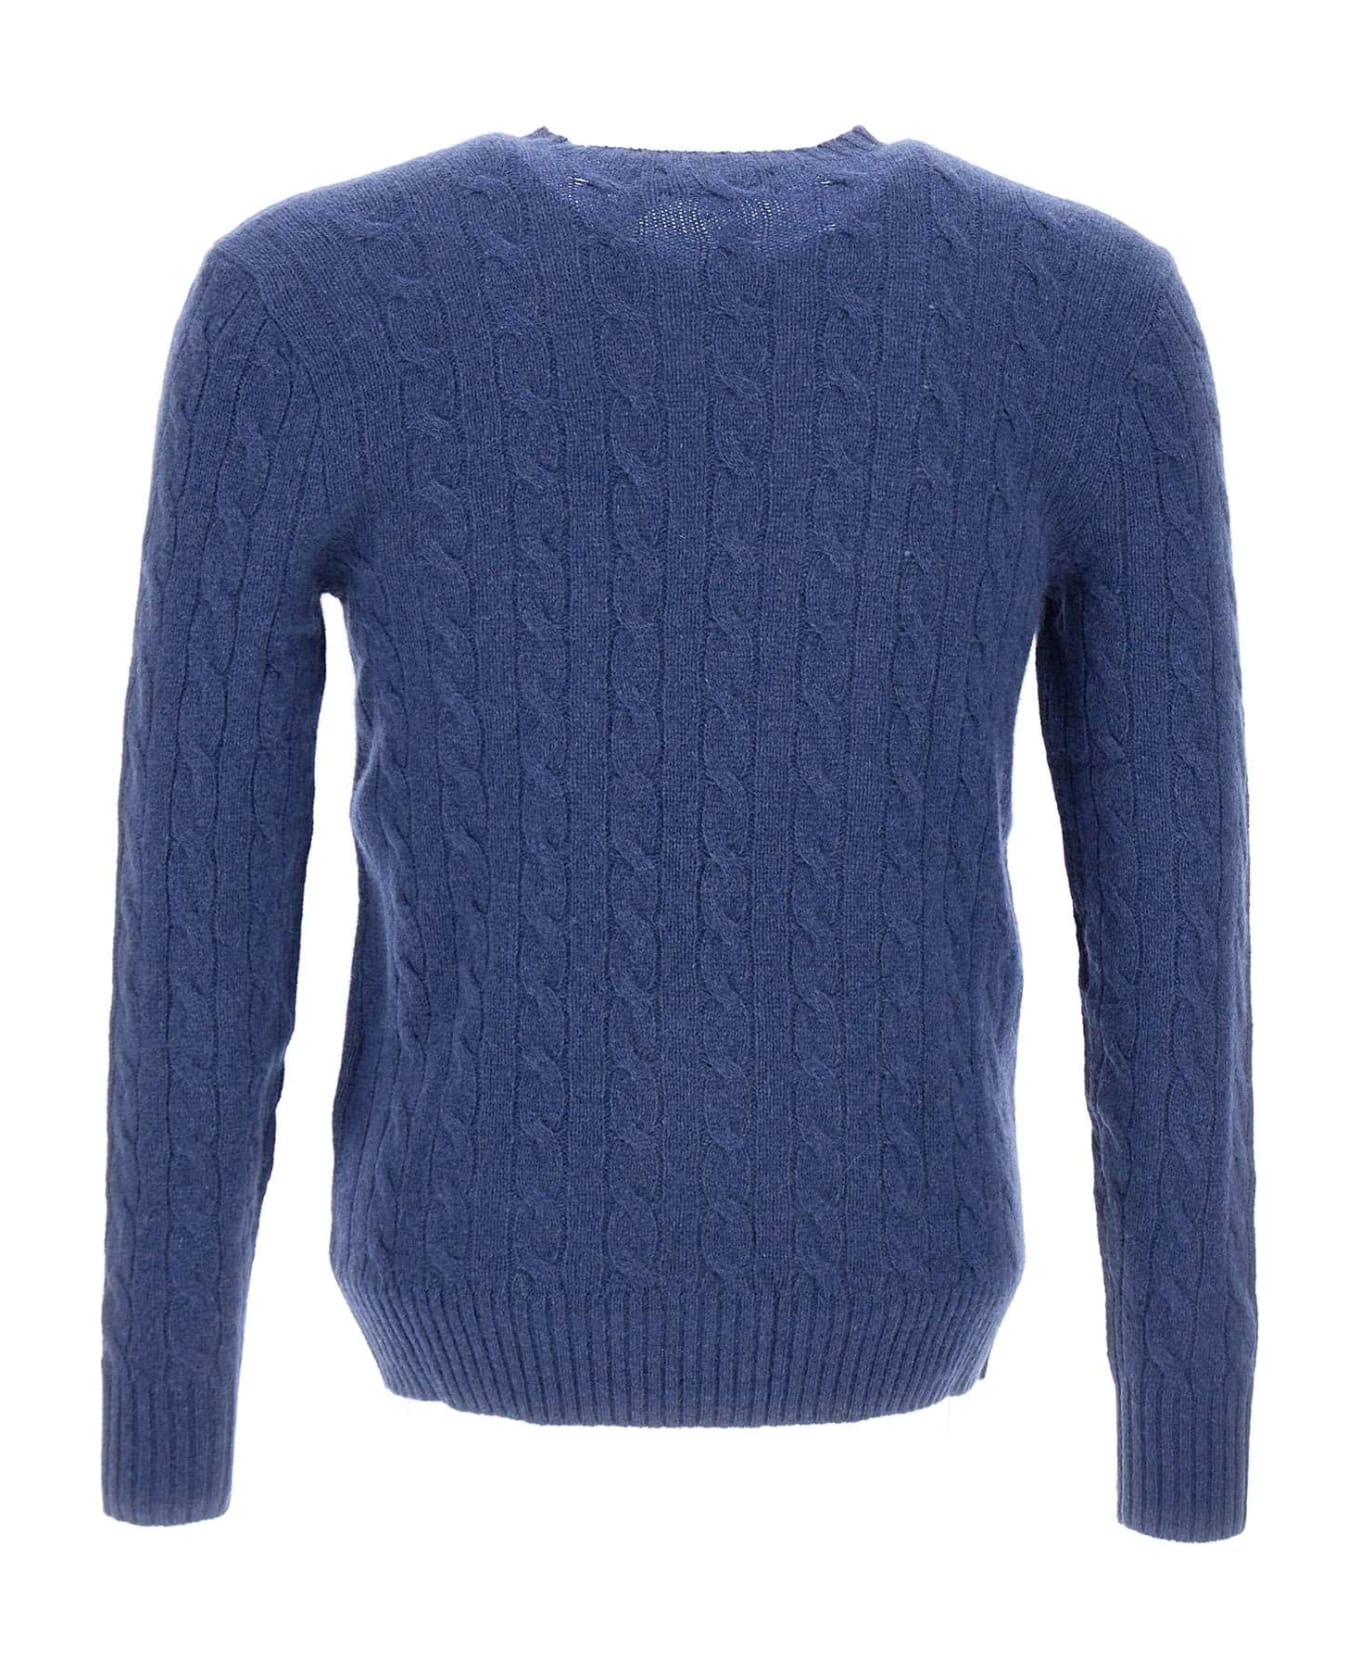 Polo Ralph Lauren Wool And Cashmere Sweater - Blue ニットウェア